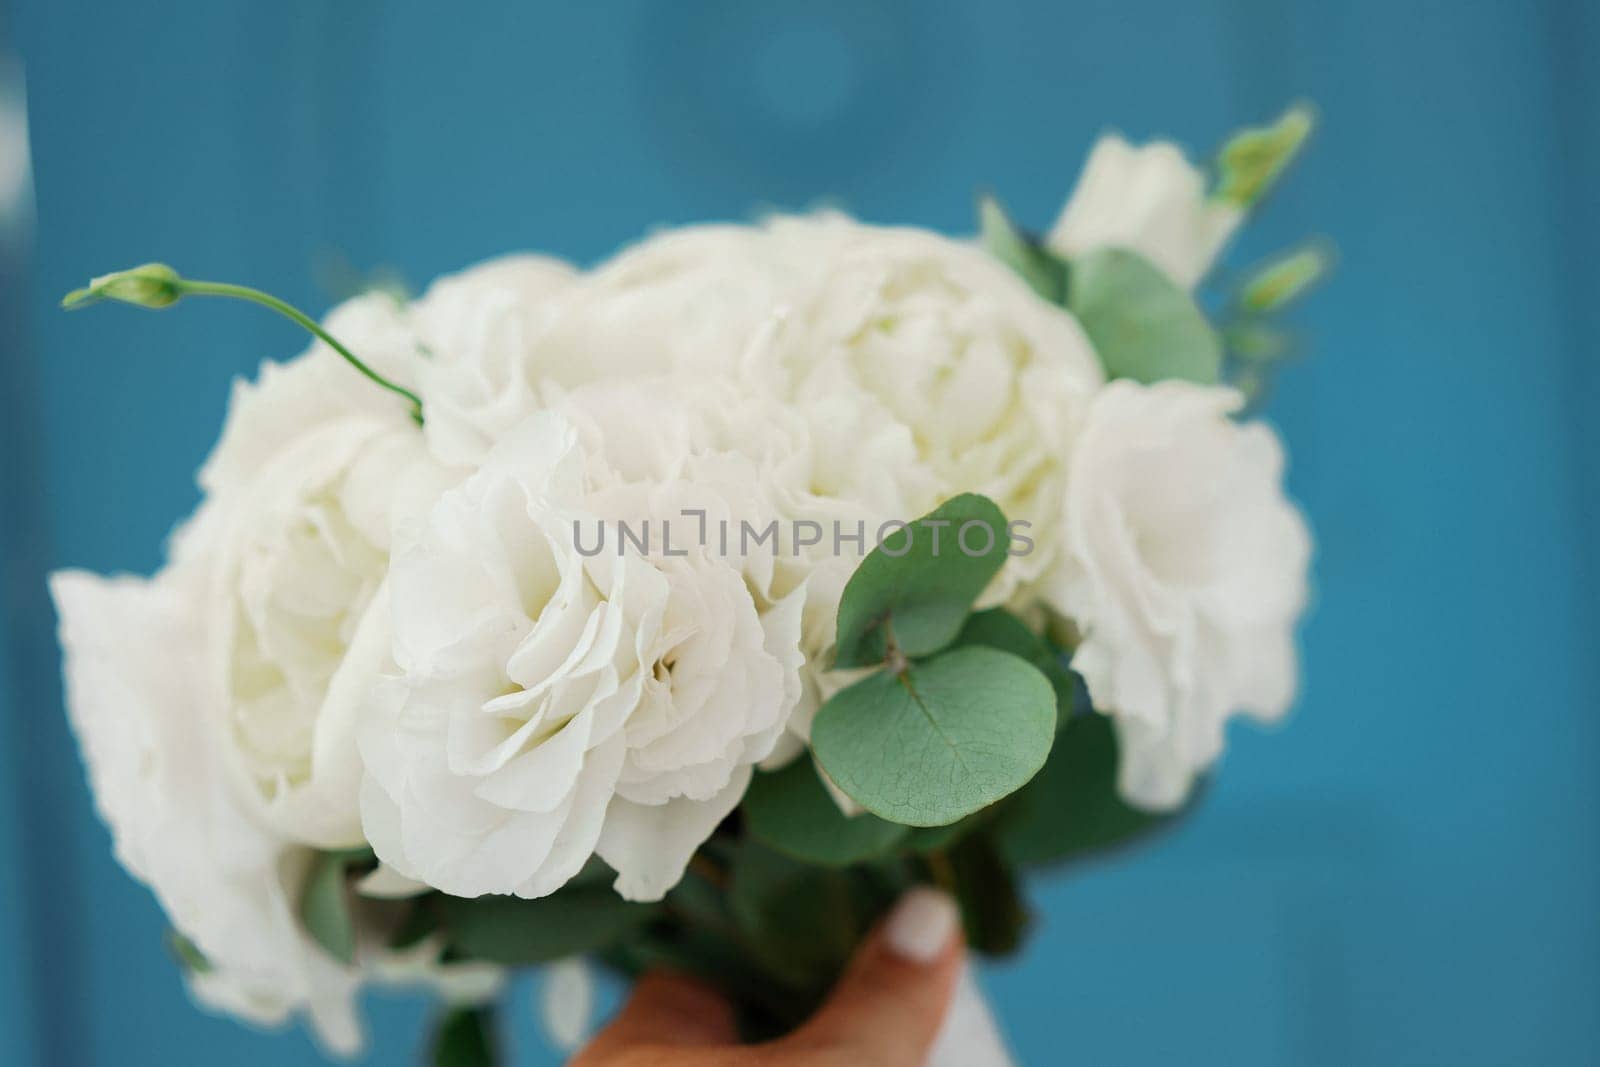 A bouquet of white flowers is being held by a person. The flowers are arranged in a vase and are placed on a blue background. The bouquet has a simple and elegant design. by Matiunina